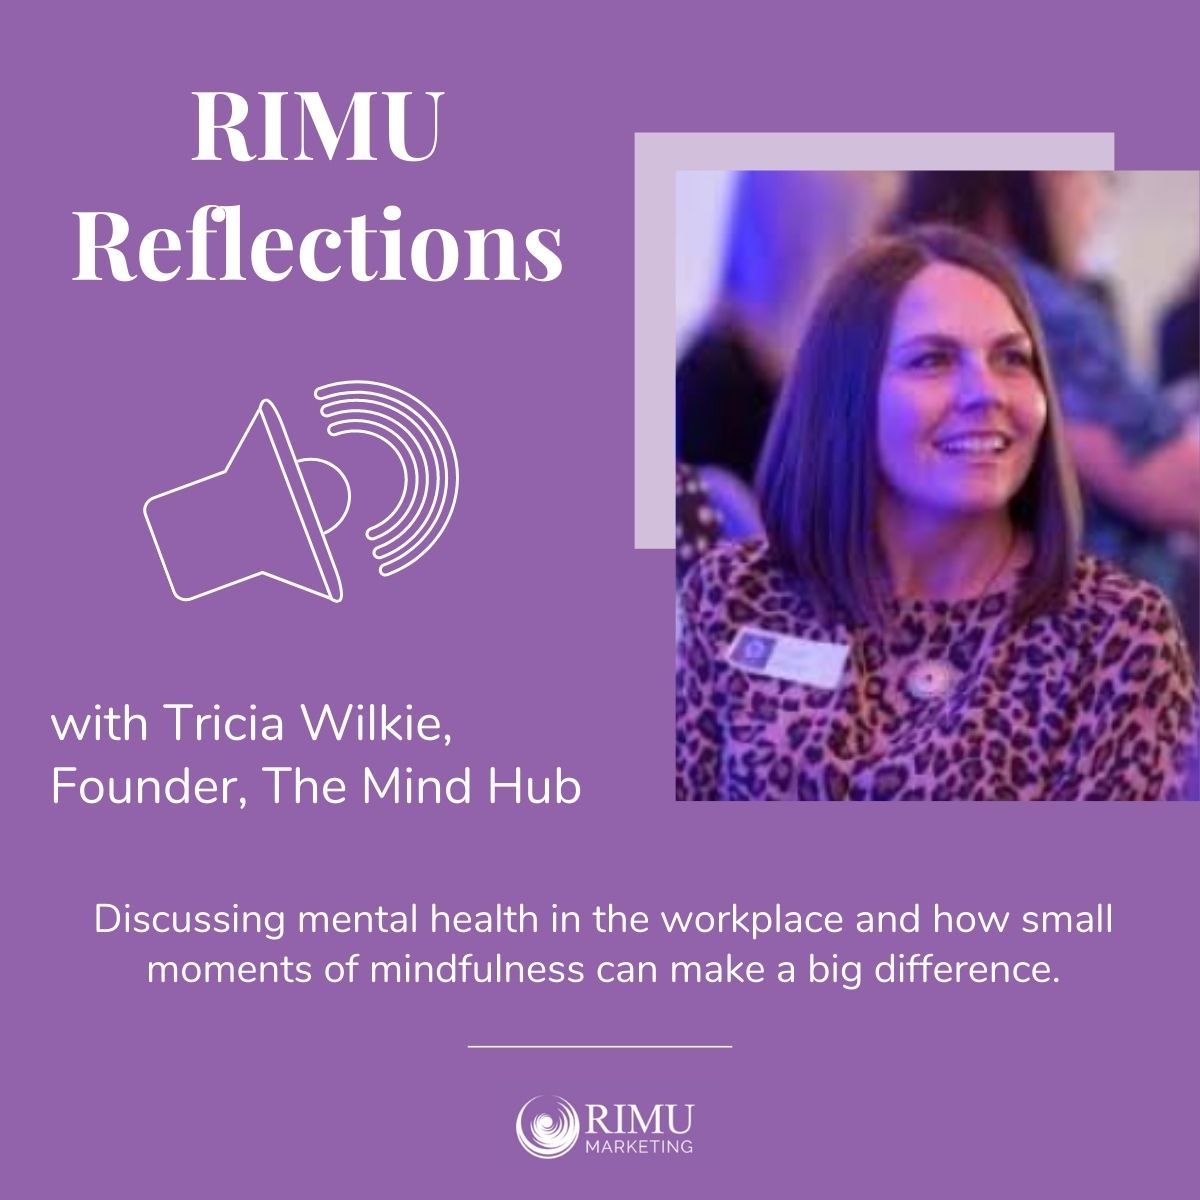 RIMU Reflections - Vlog with Tricia Wilkie